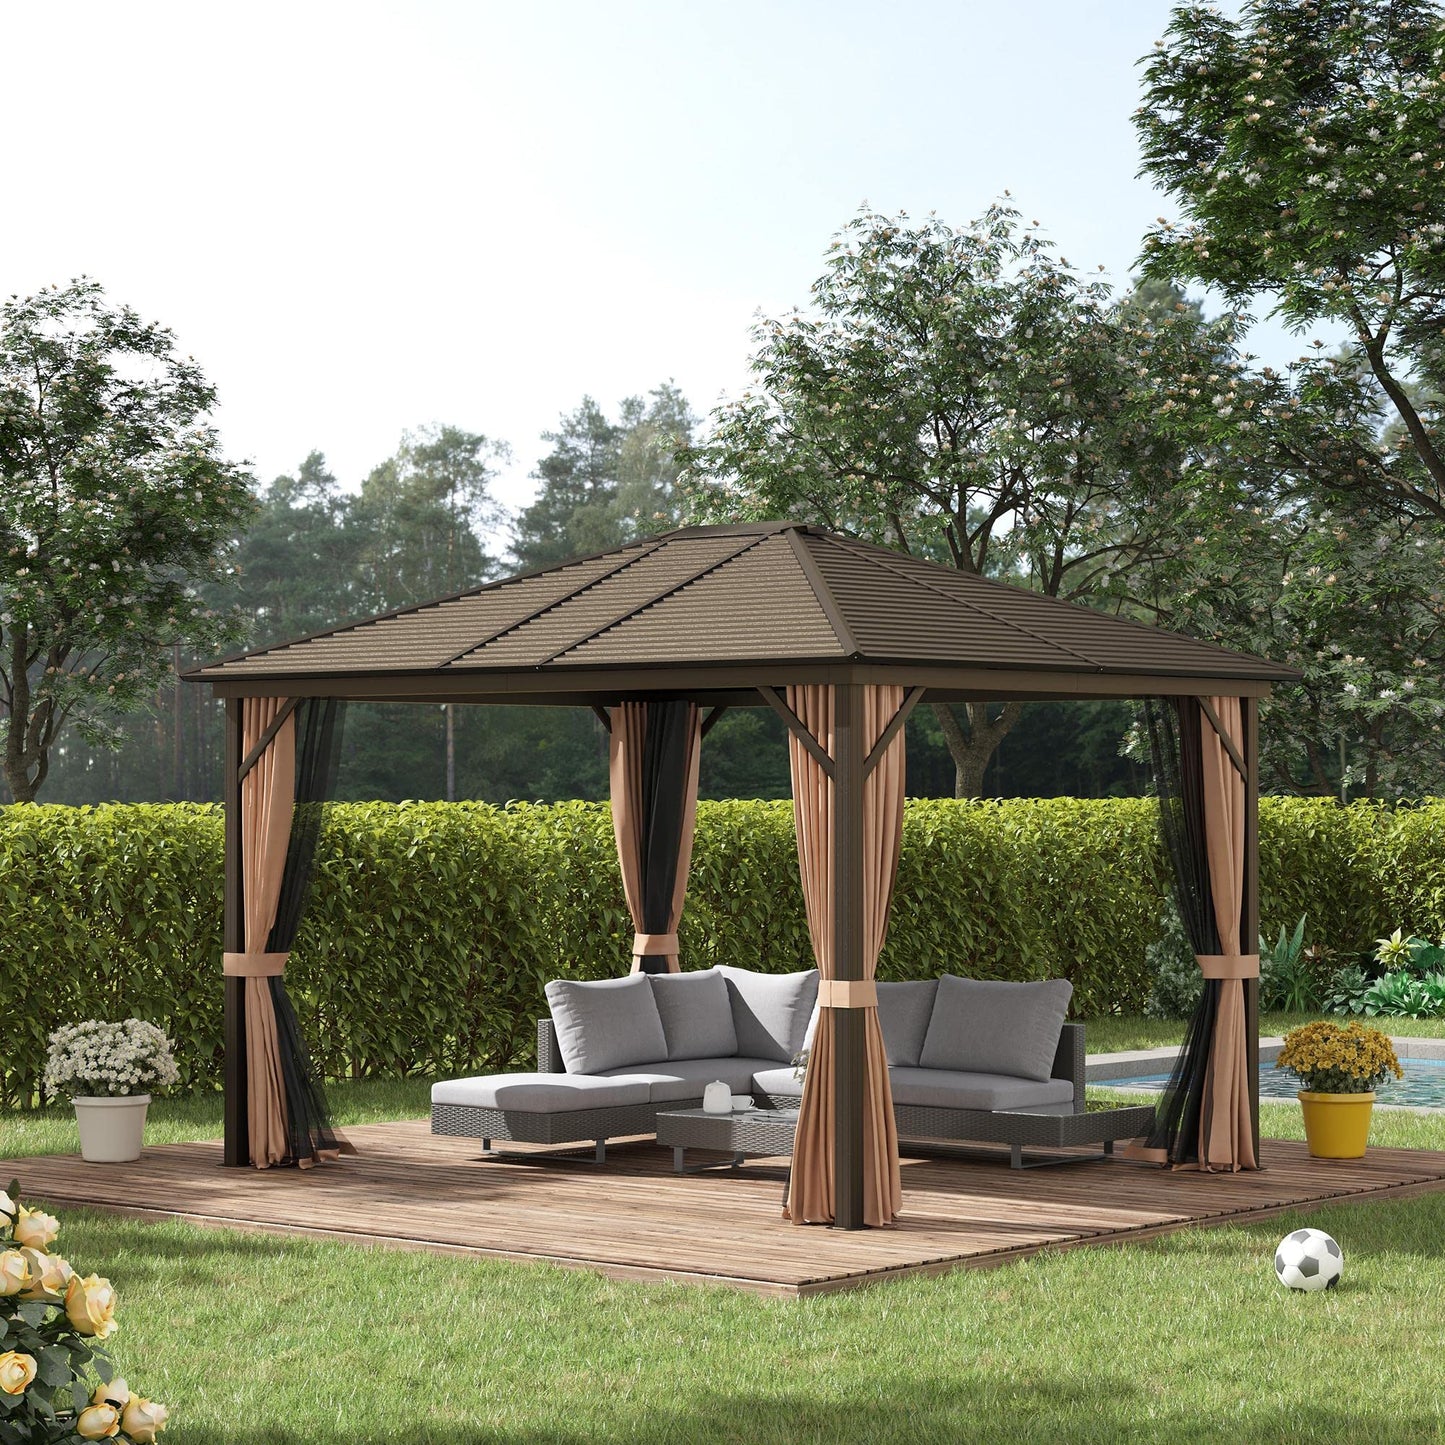 Outsunny 10x12ft Hardtop Gazebo, Steel Roof, Netting, Curtains, Brown